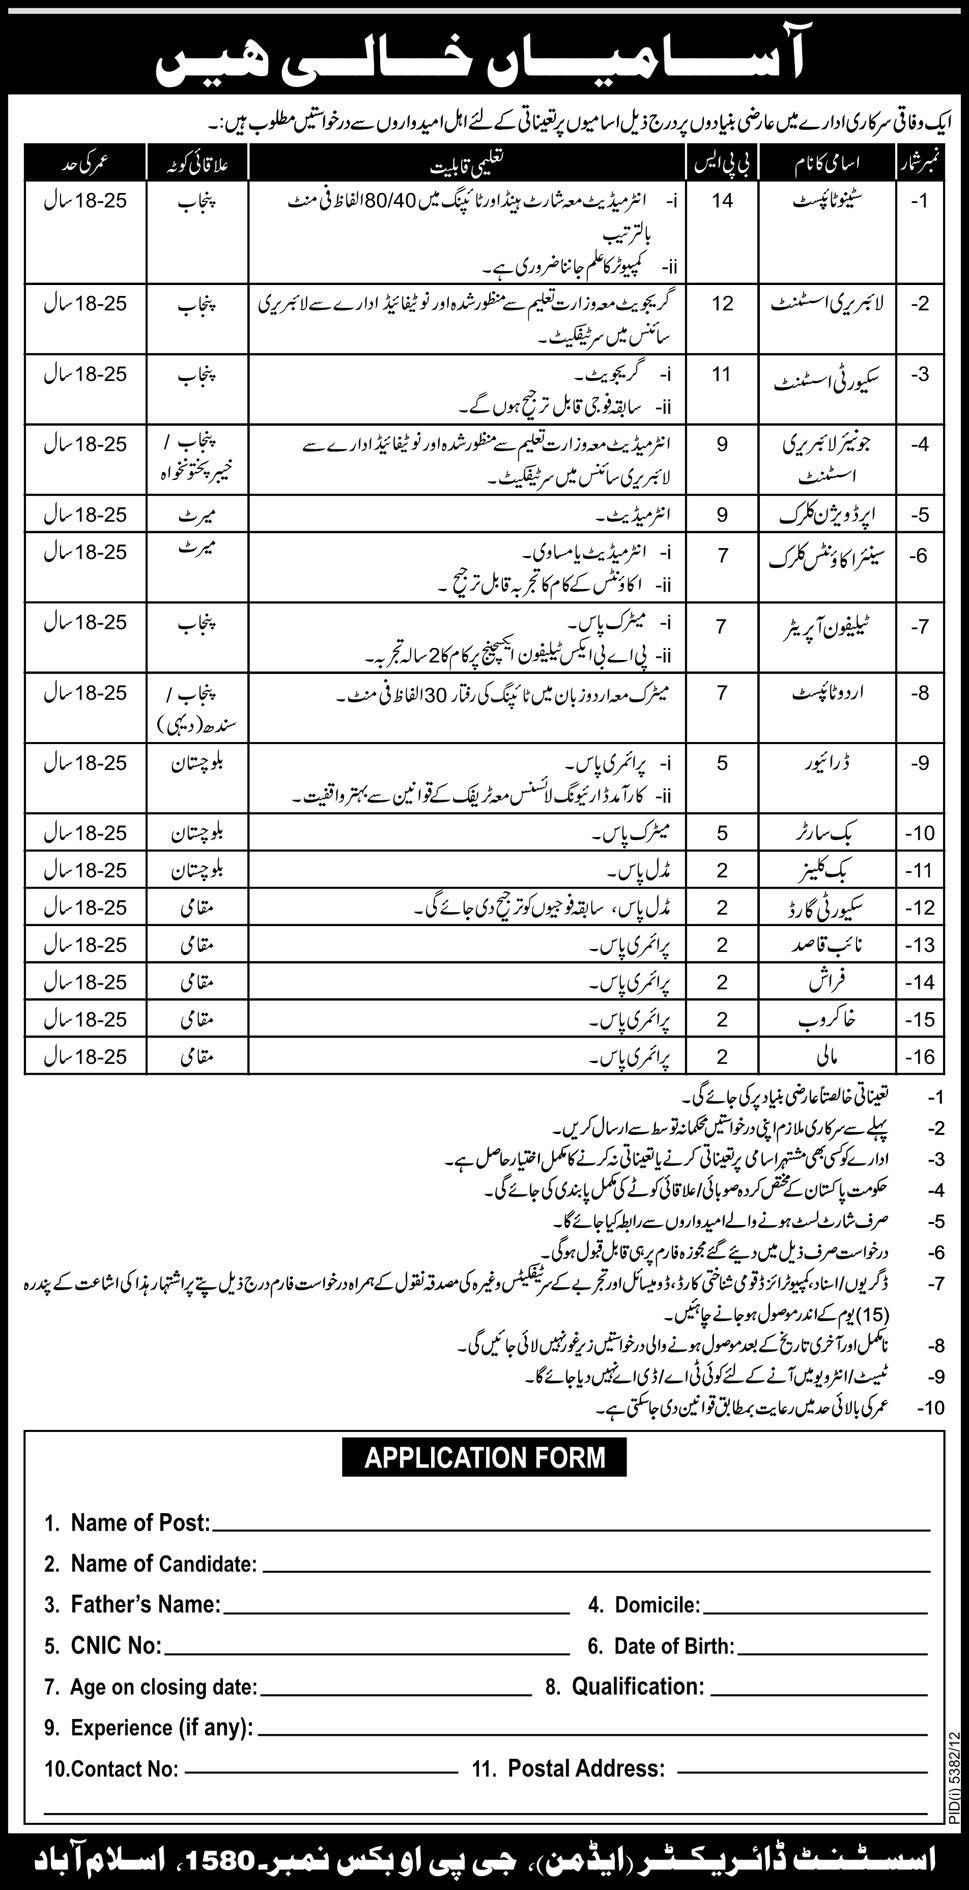 Federal Government Islamabad Jobs in Newspaper Pakistan 2013